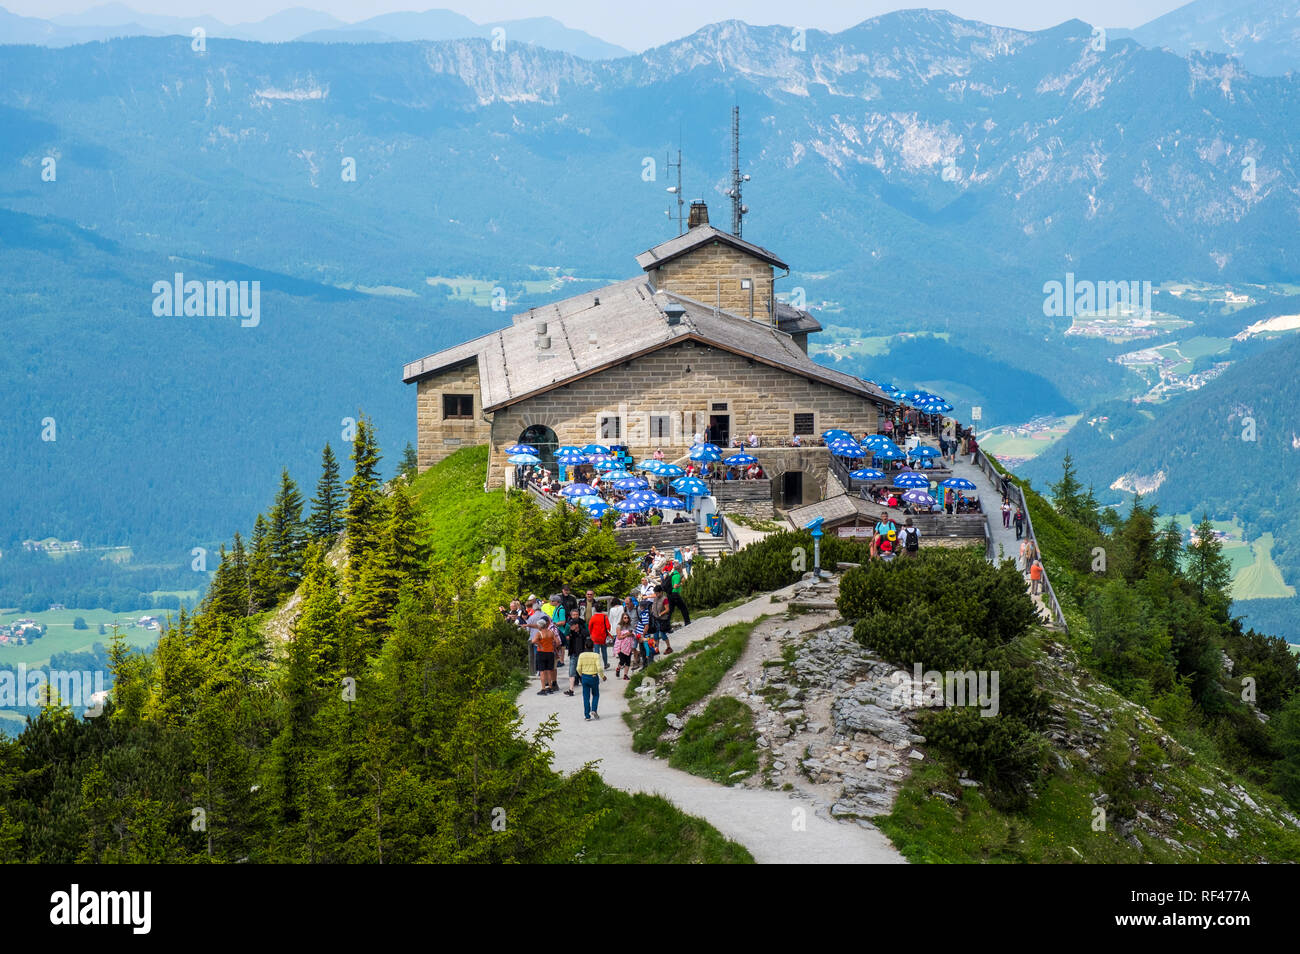 The Kehlsteinhaus or The Eagle's Nest, Obersalzburg, Berchtesgaden, Germany, Europe Stock Photo